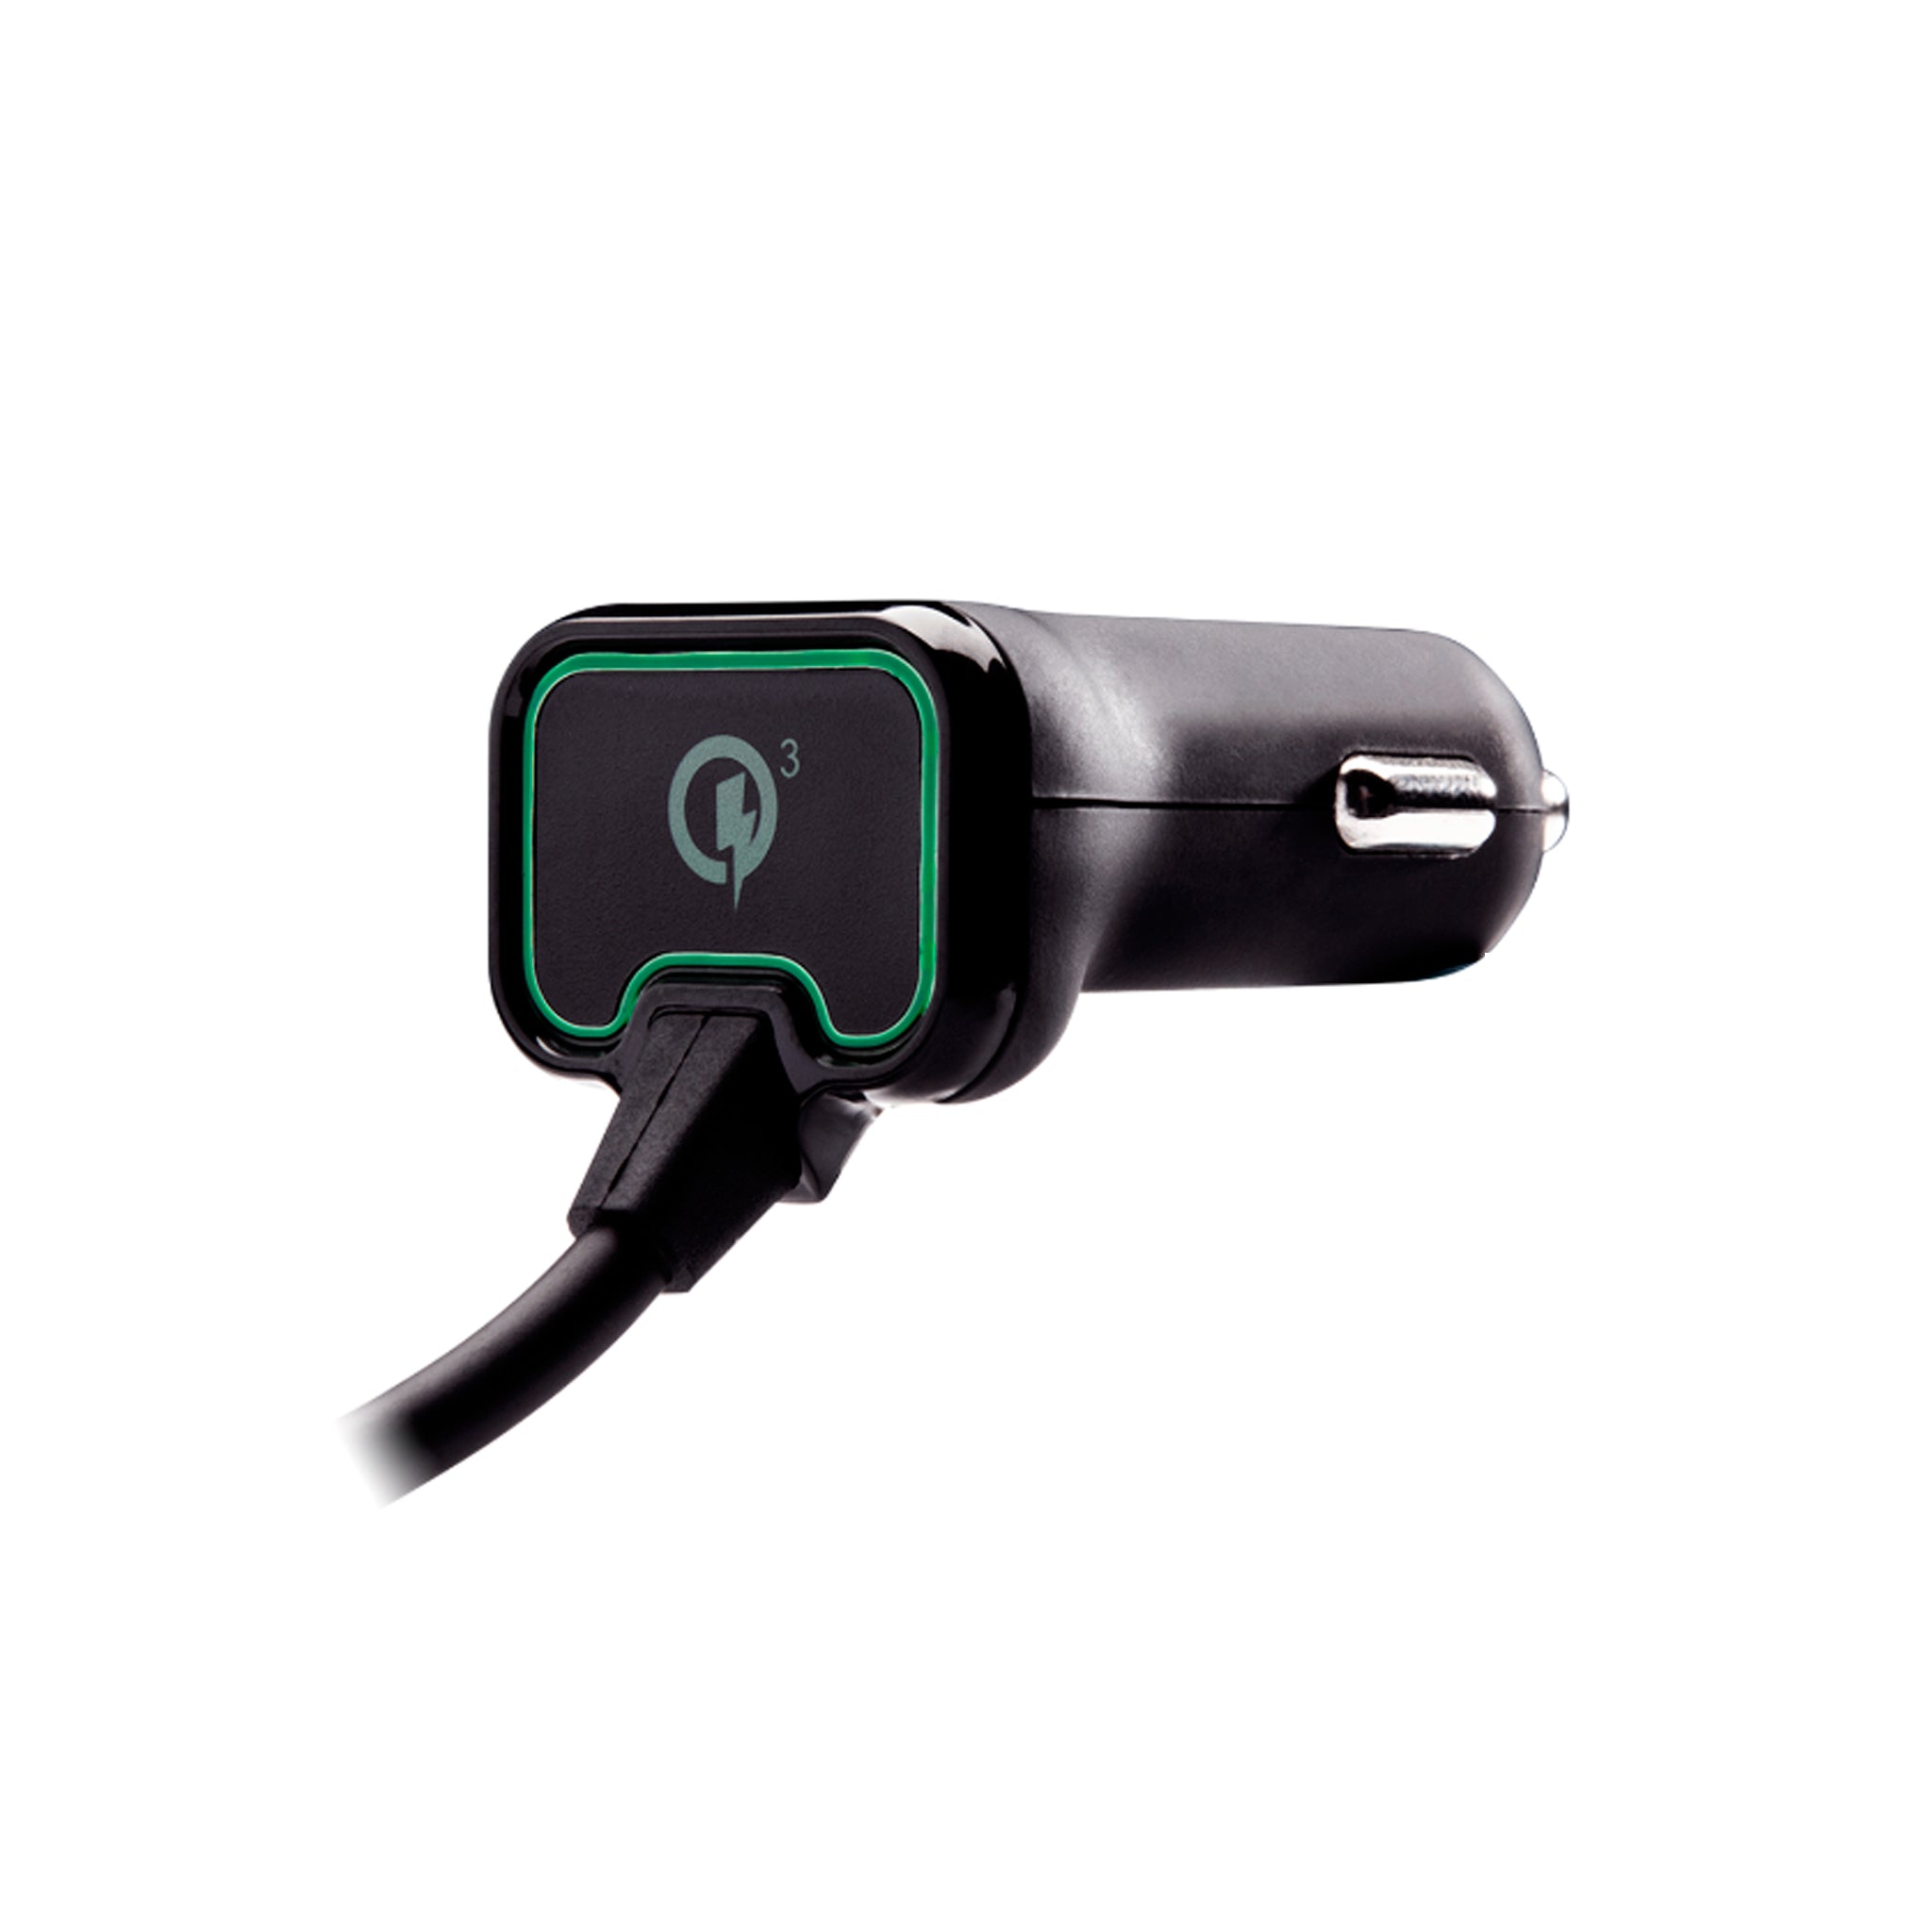 Qmadix - Car Charger Quick Charge 3.0 For Type C Devices - Black